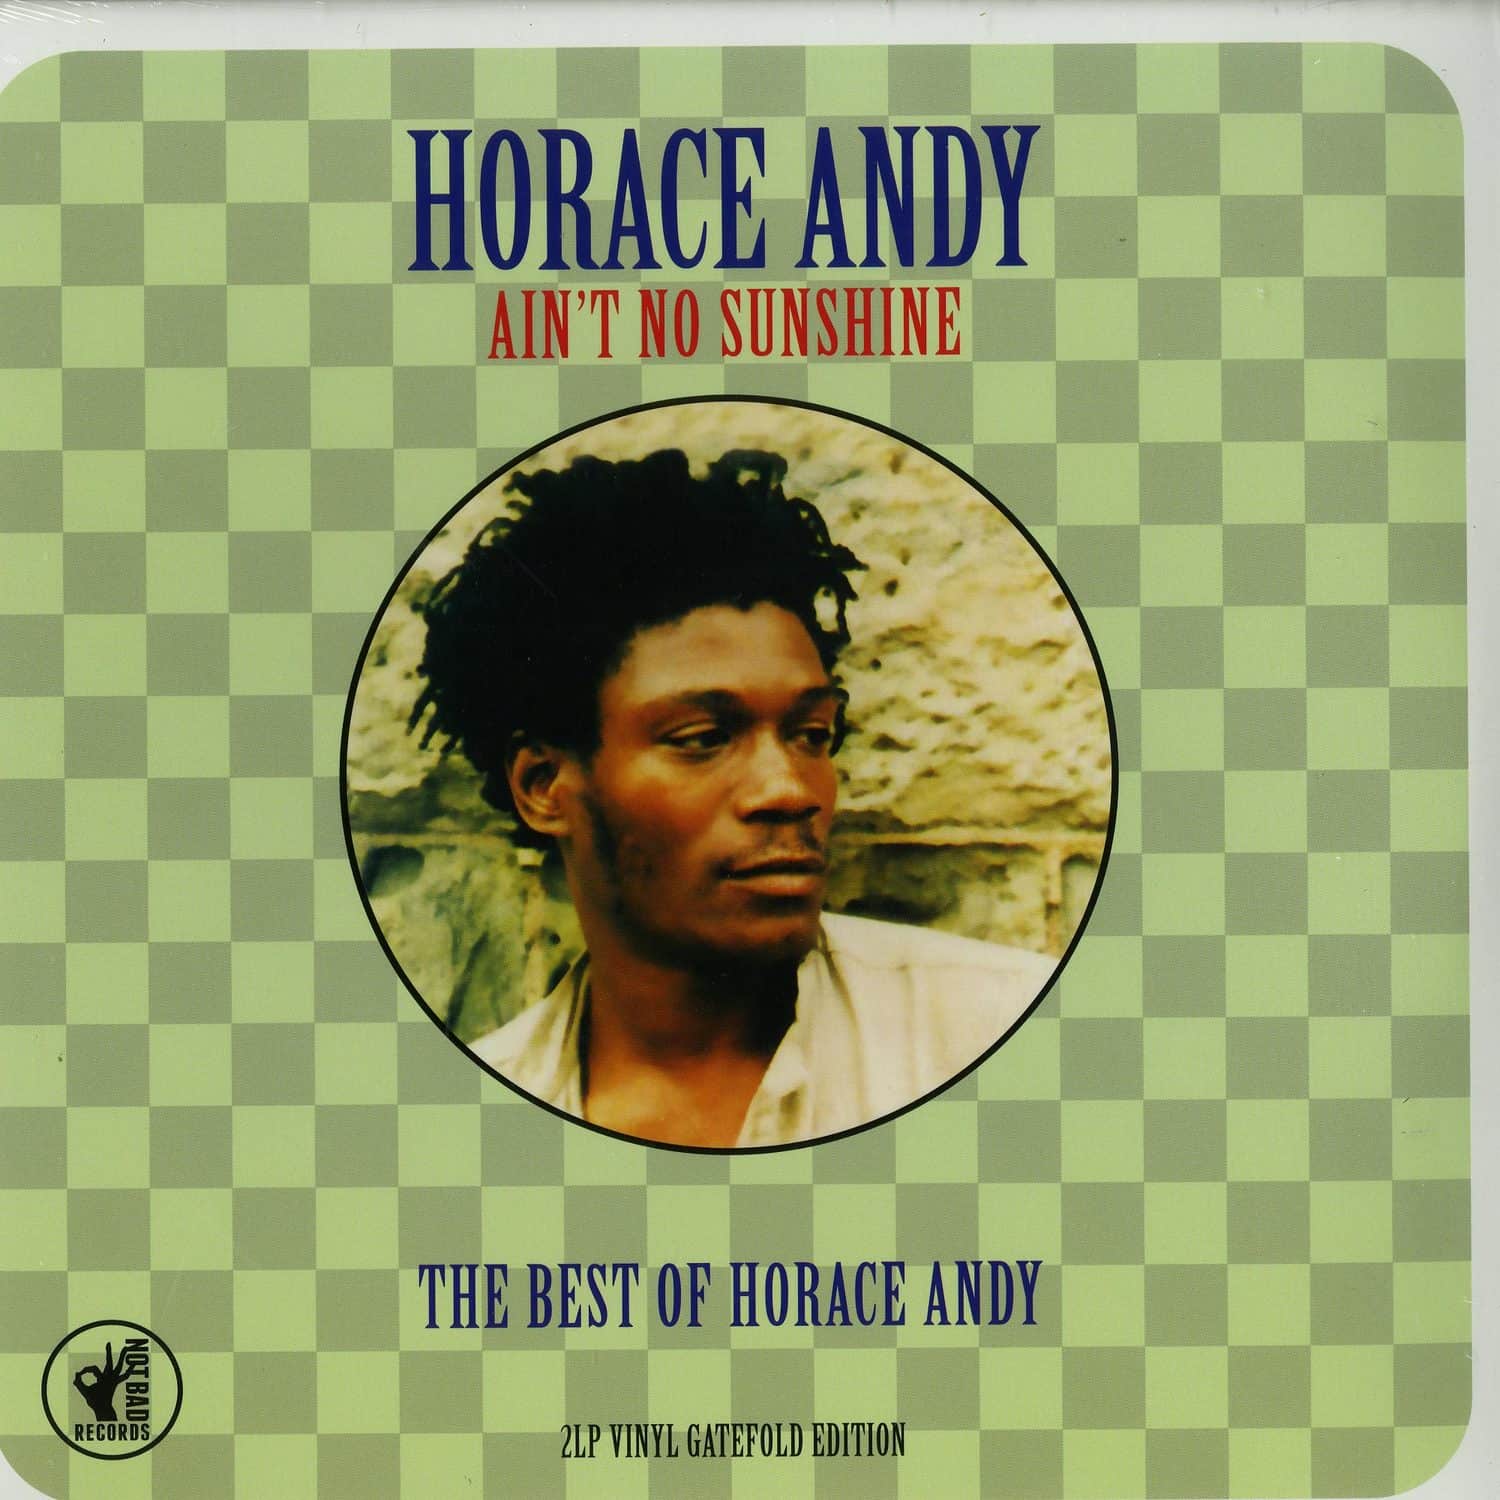 Horace Andy - BEST OF: AINT NO SUNSHINE 